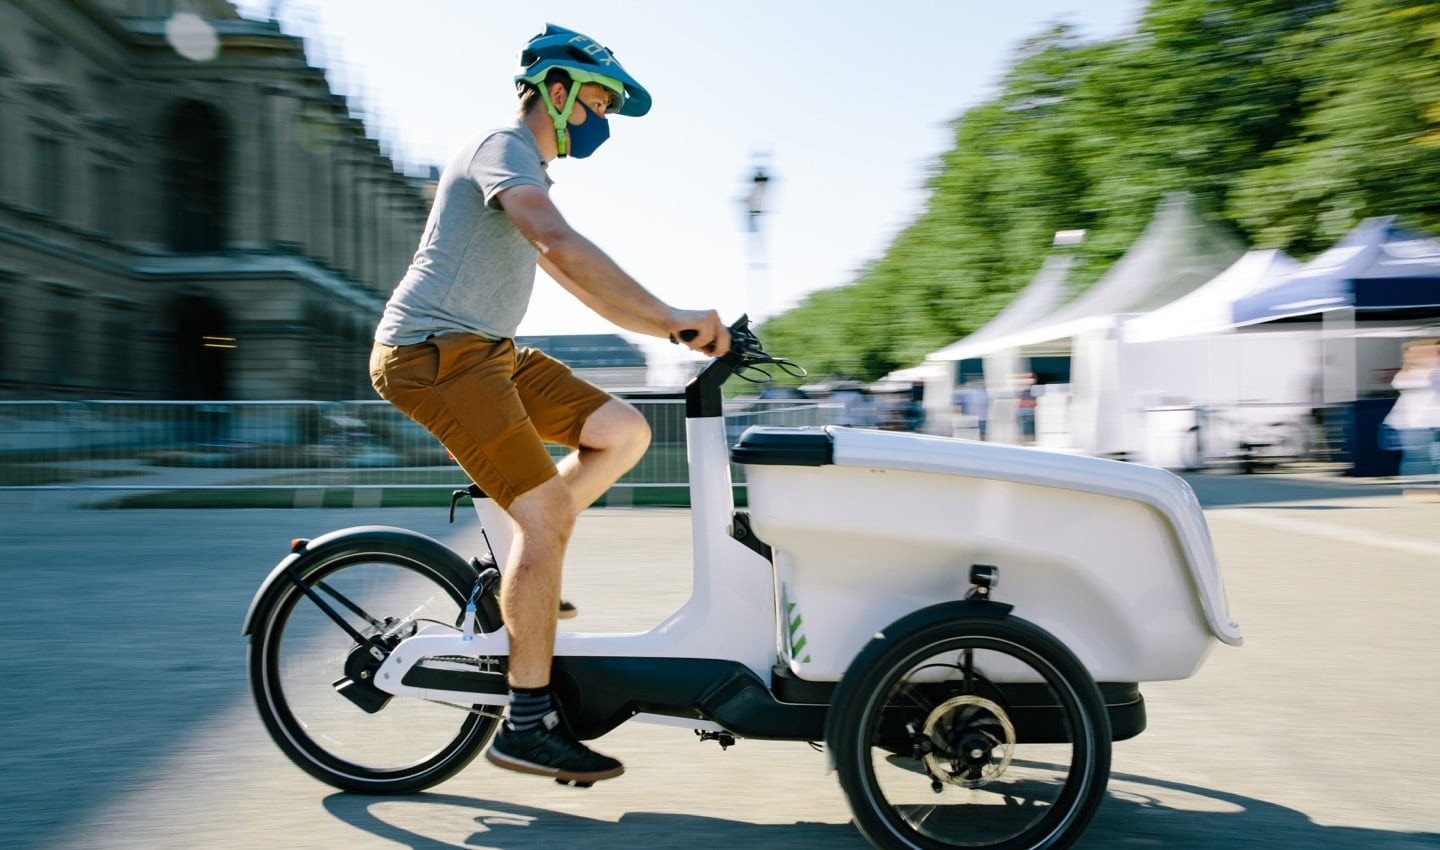 Ebikes got a lot of attention at this year’s IAA. With space to test the machines, visitors were able to get hands on.